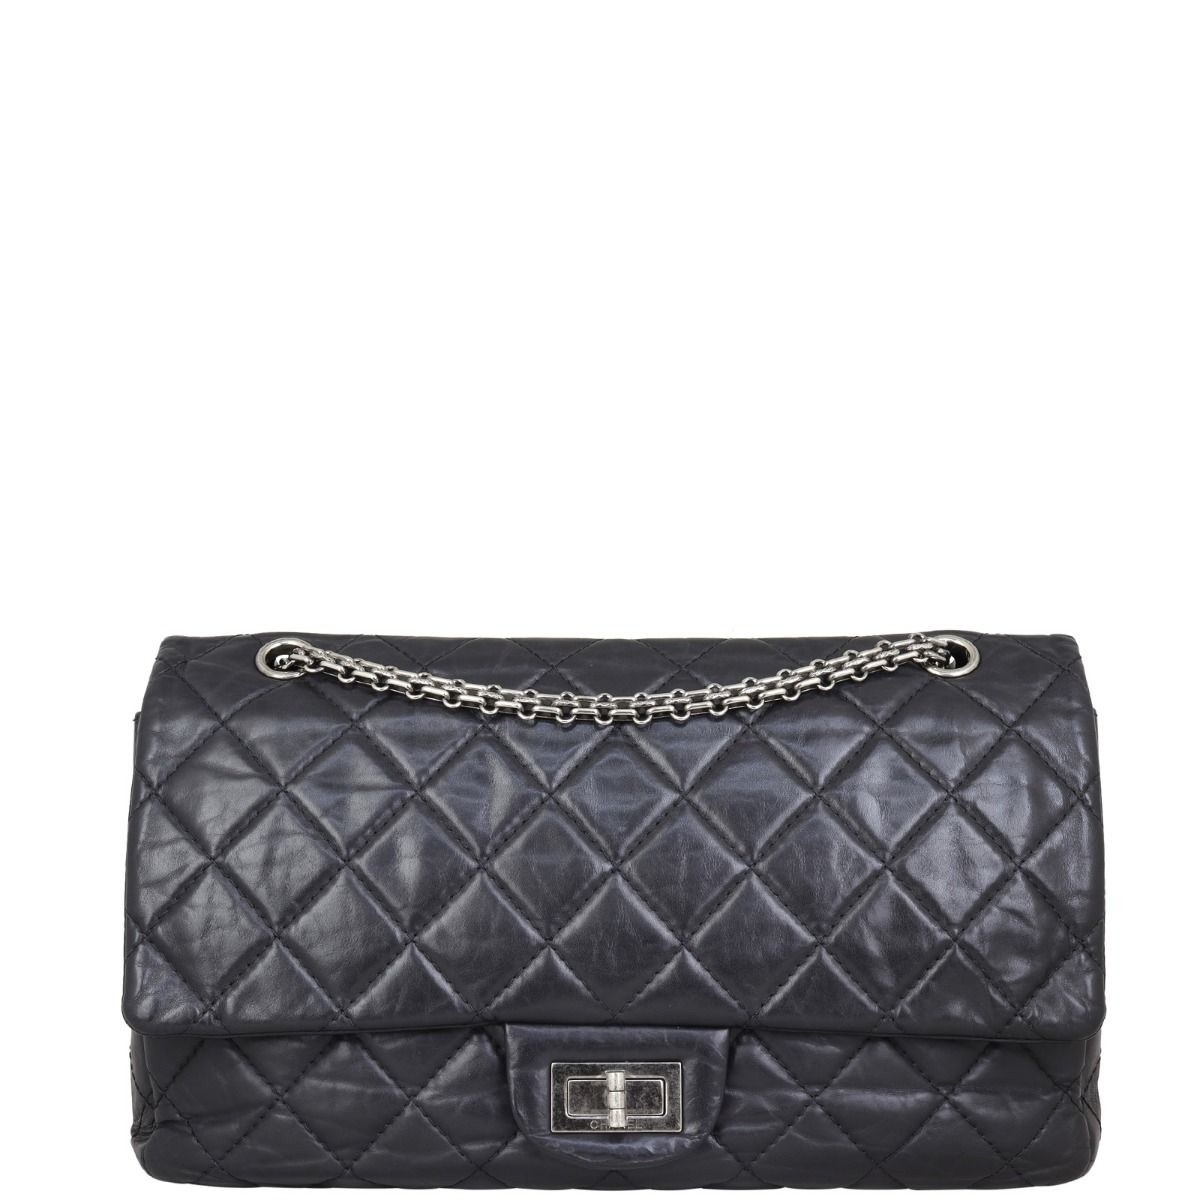 10 Facts You Should Know About Chanel Flap Bags  PurseBlog